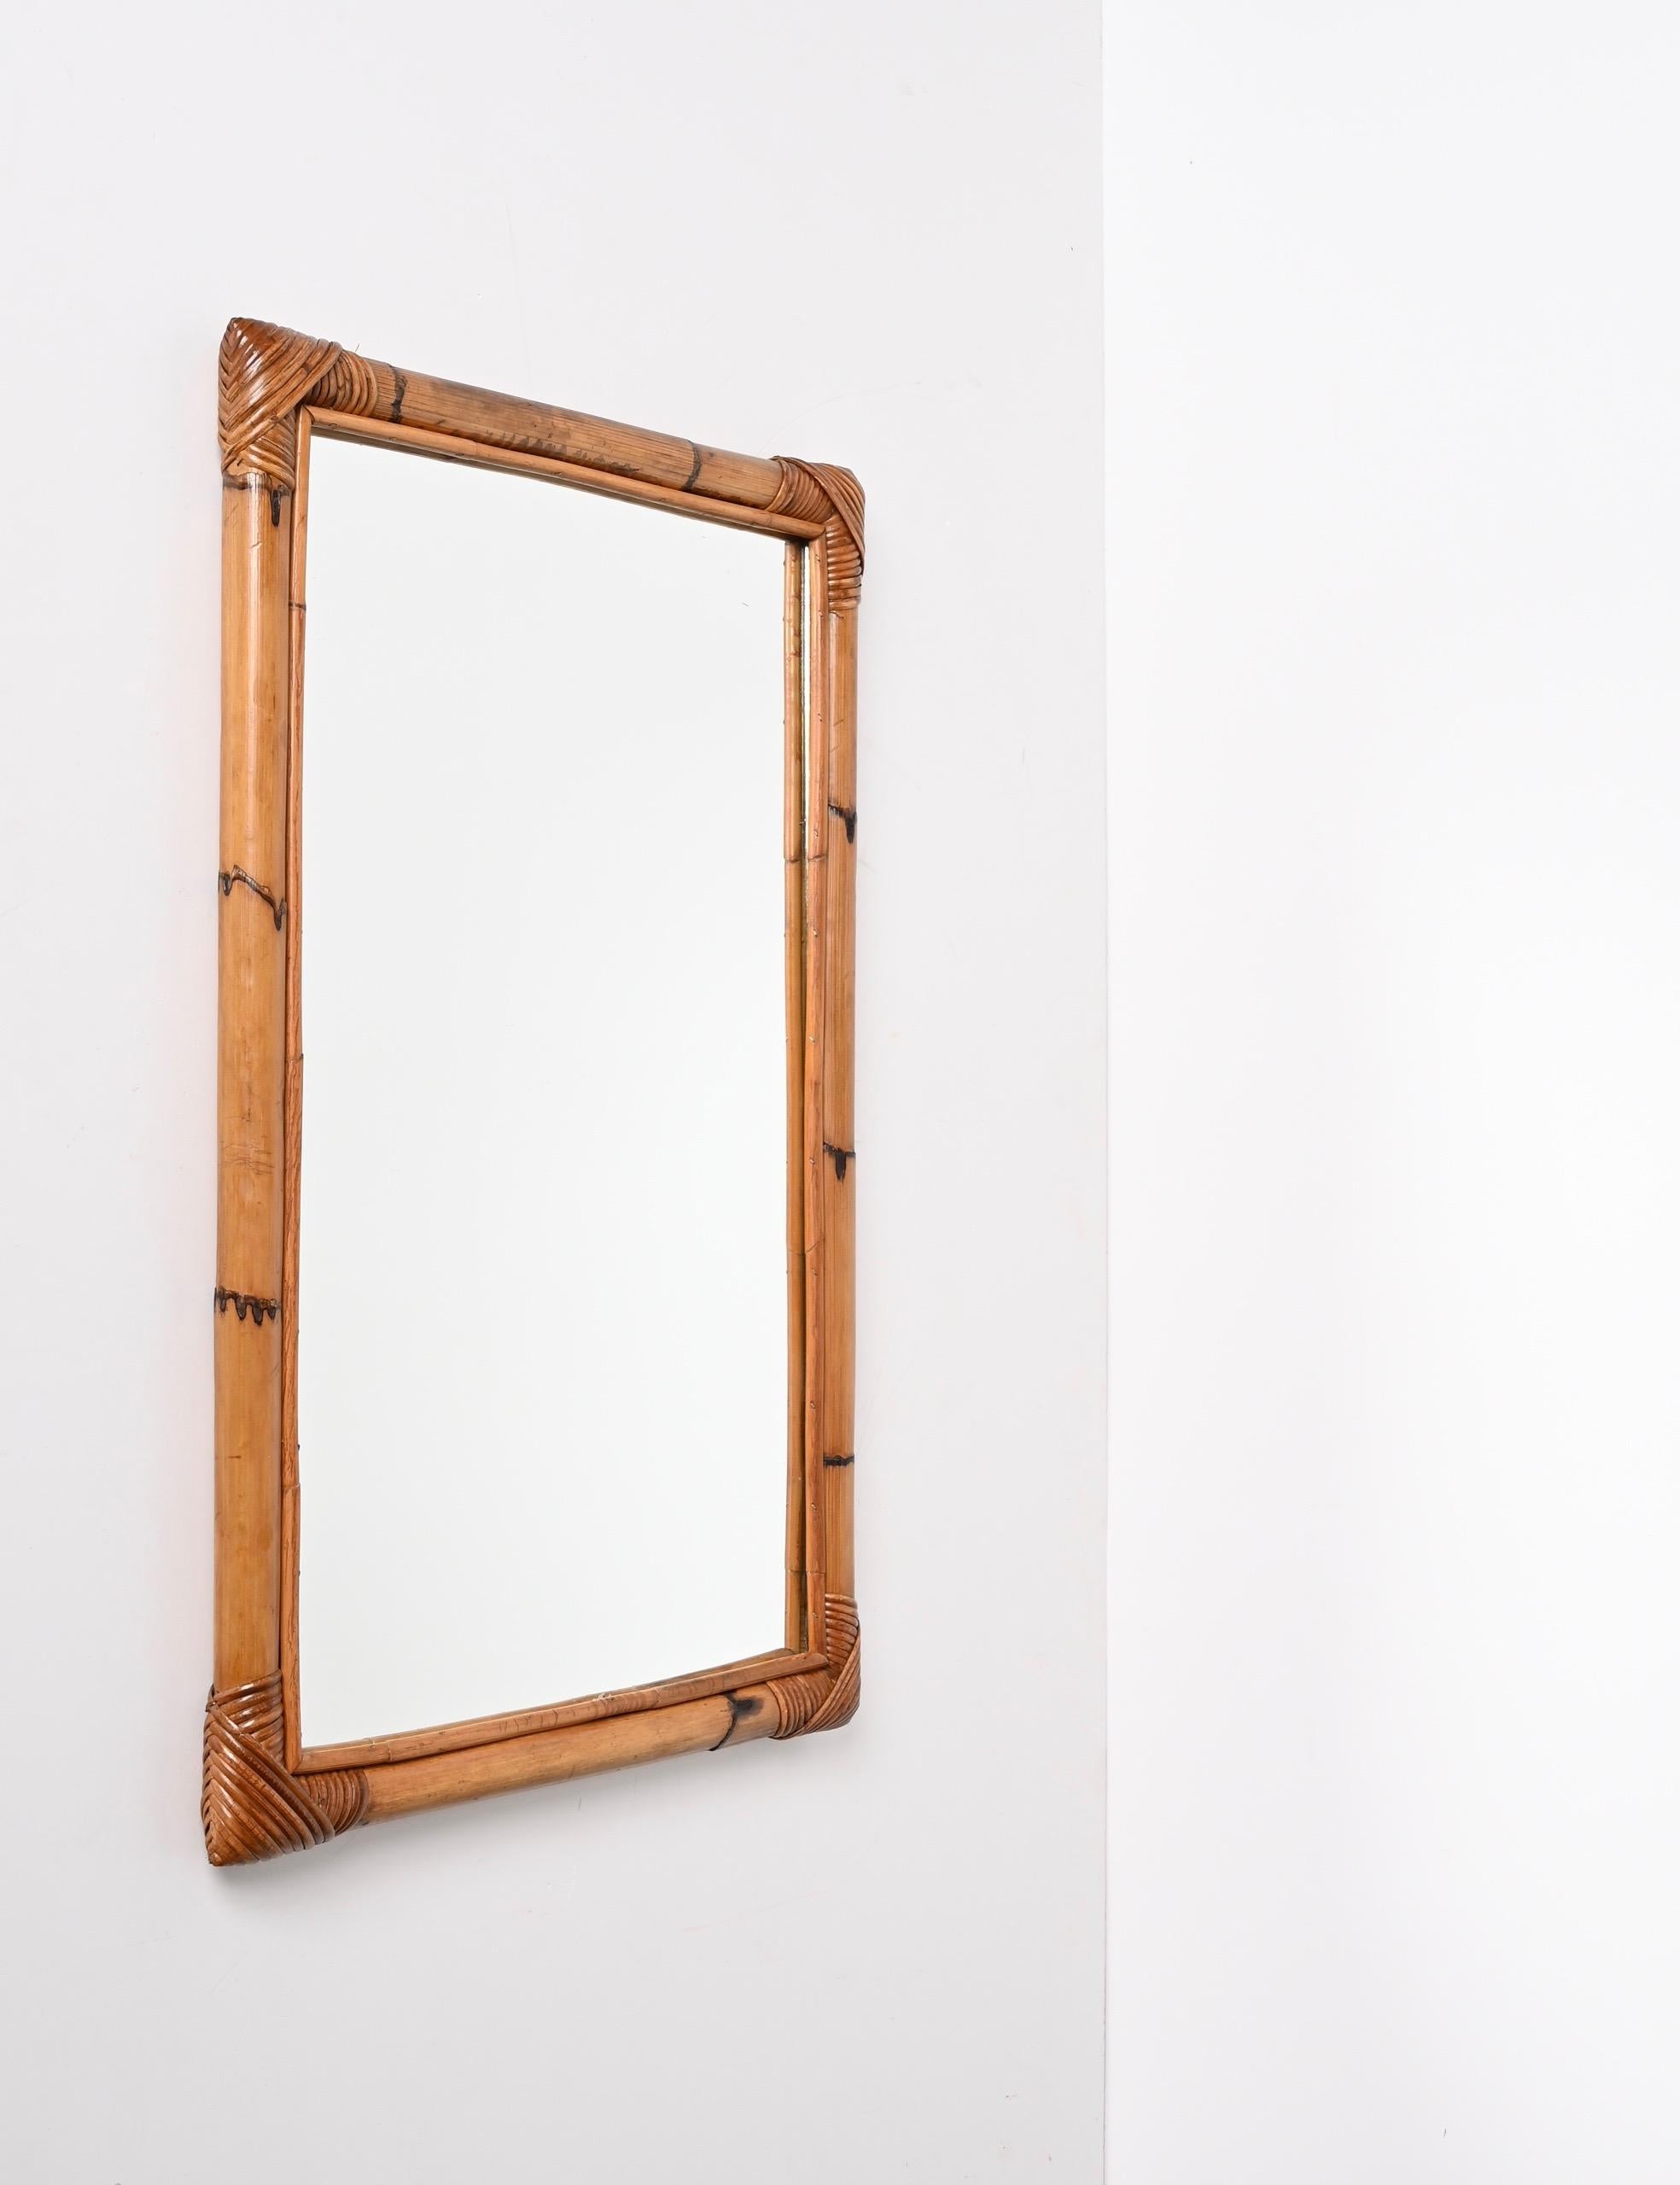 Midcentury Rectangular Italian Mirror with Double Bamboo Cane Frame, 1970s For Sale 9